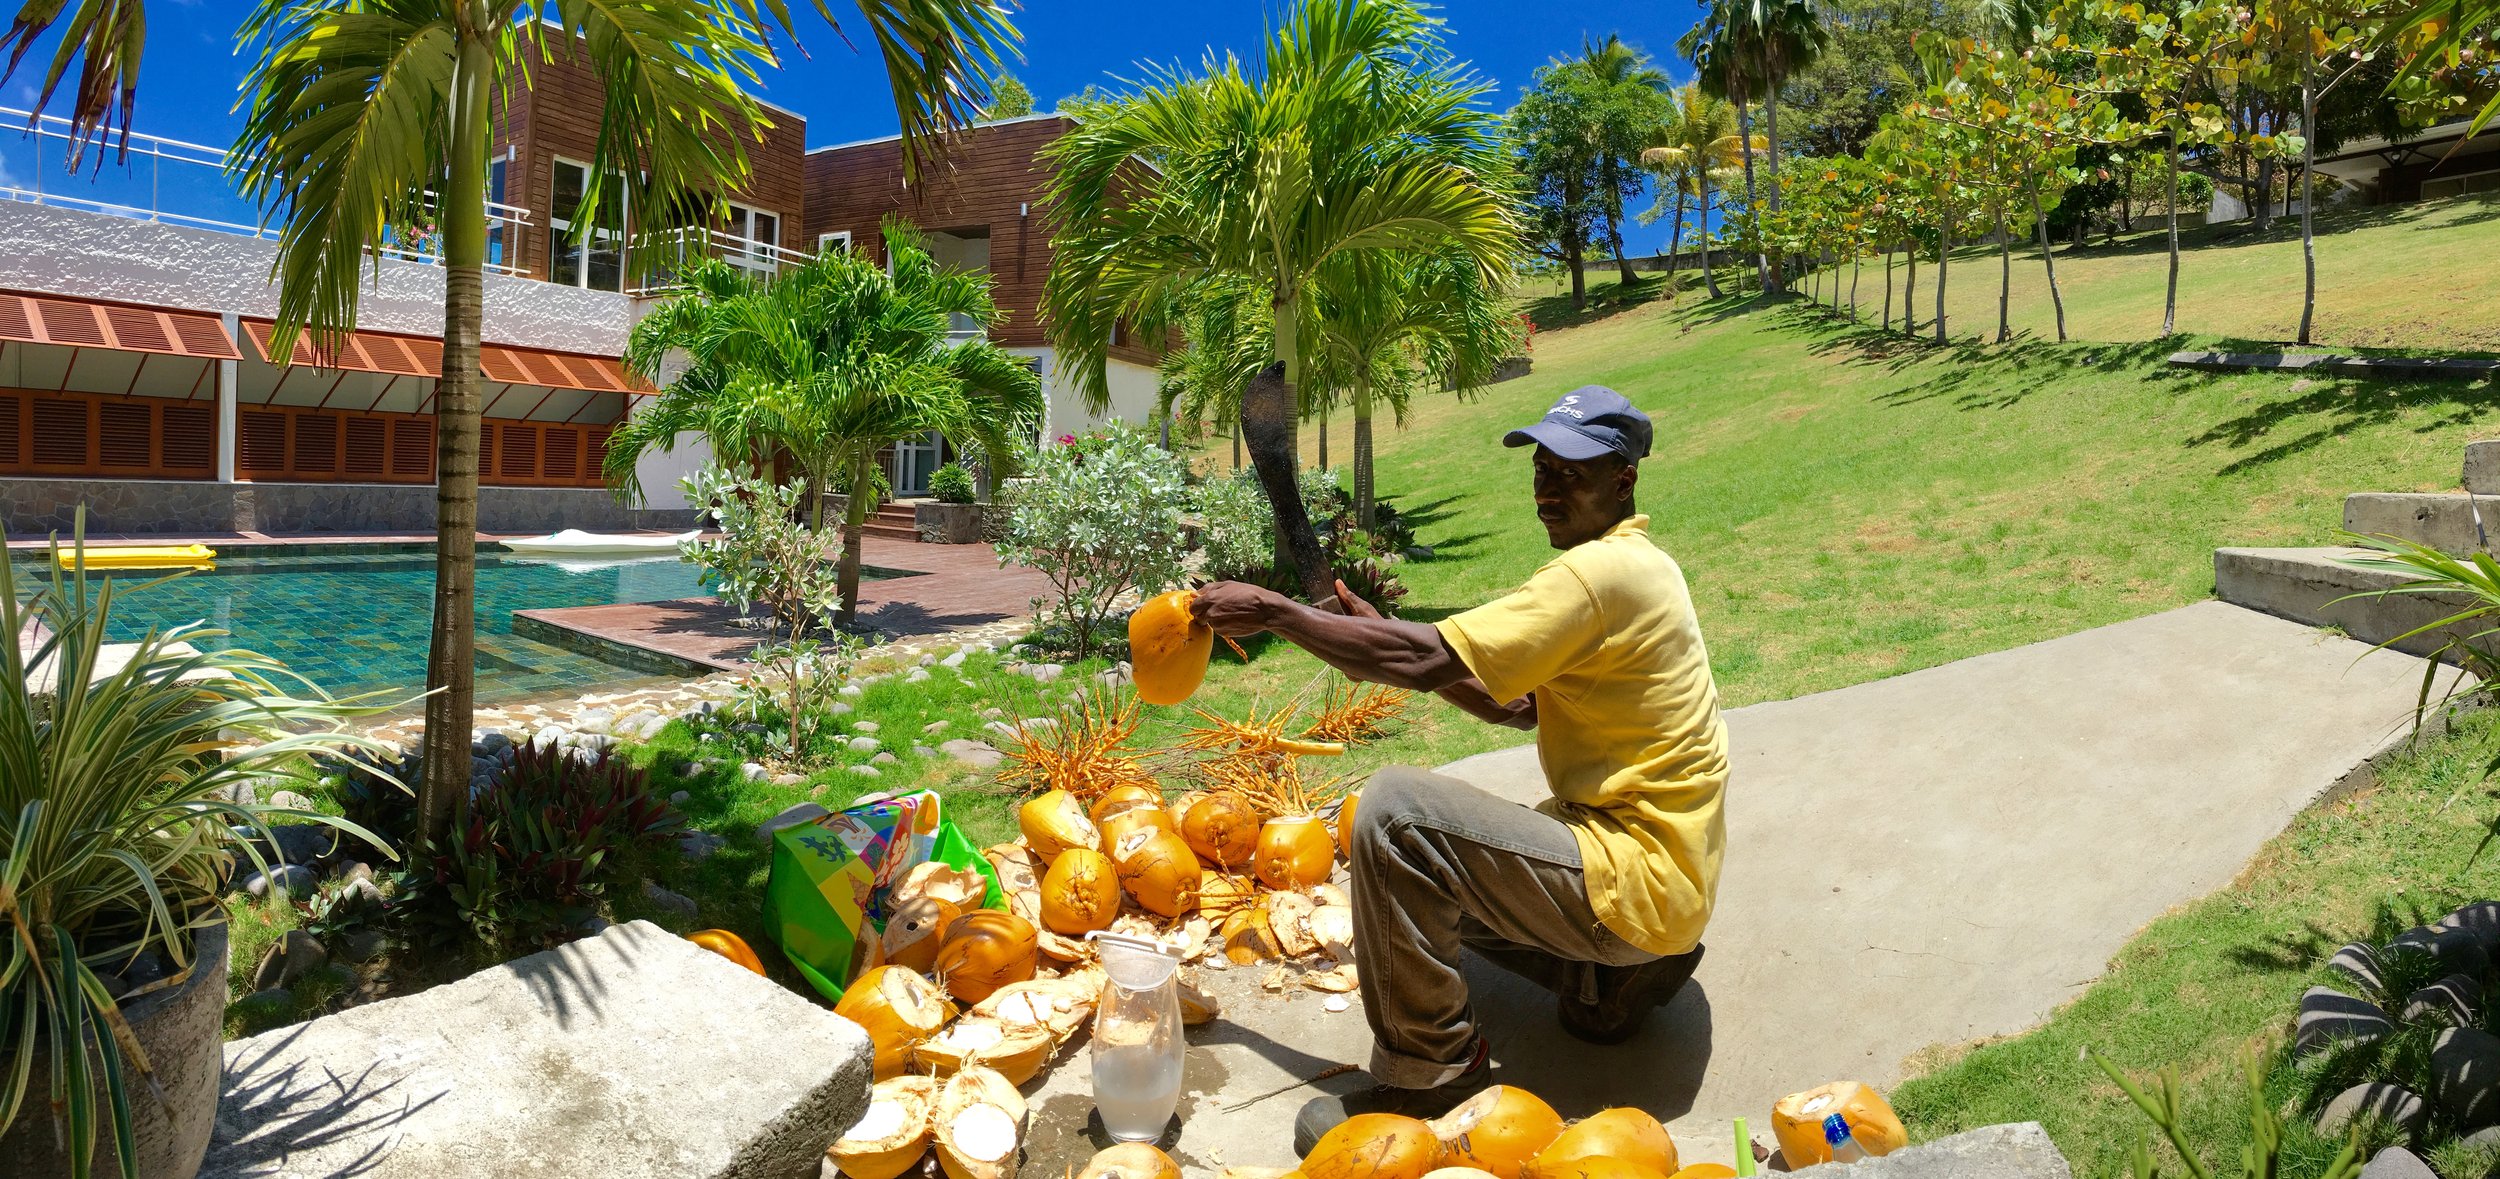  Caribbean coconuts are omnipresent: You’ll find them on plates, in drinks and for sale along the highway ( photo courtesy Le Domaine des Fonds Blancs ).  